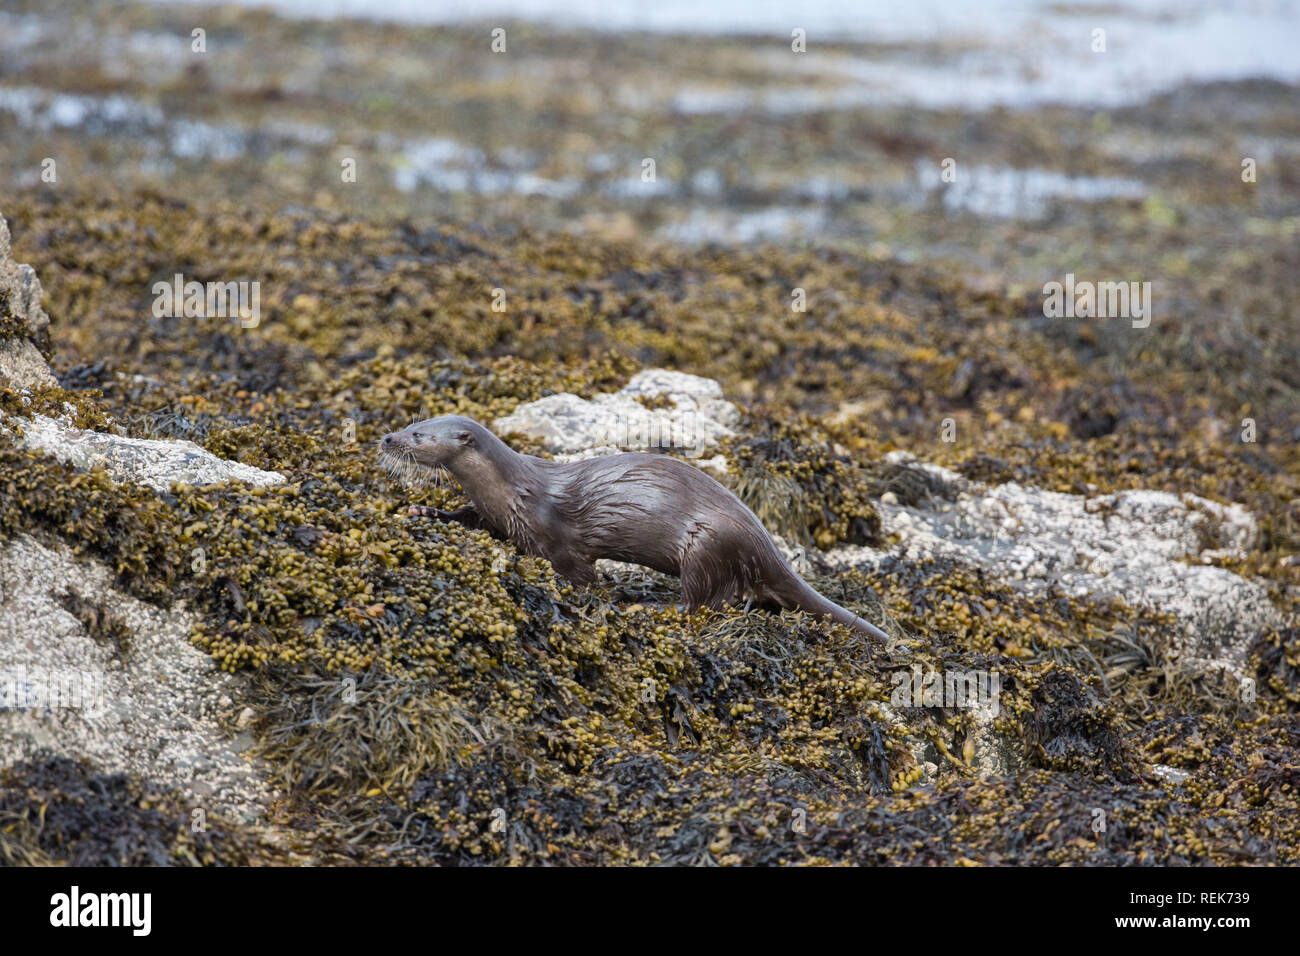 EURASIAN OTTER (Lutra lutra). Movement, seeking food amongst brown seaweeds in the beach intertidal zone on a Mull beach. Colour camouflaged. Scotland. Stock Photo